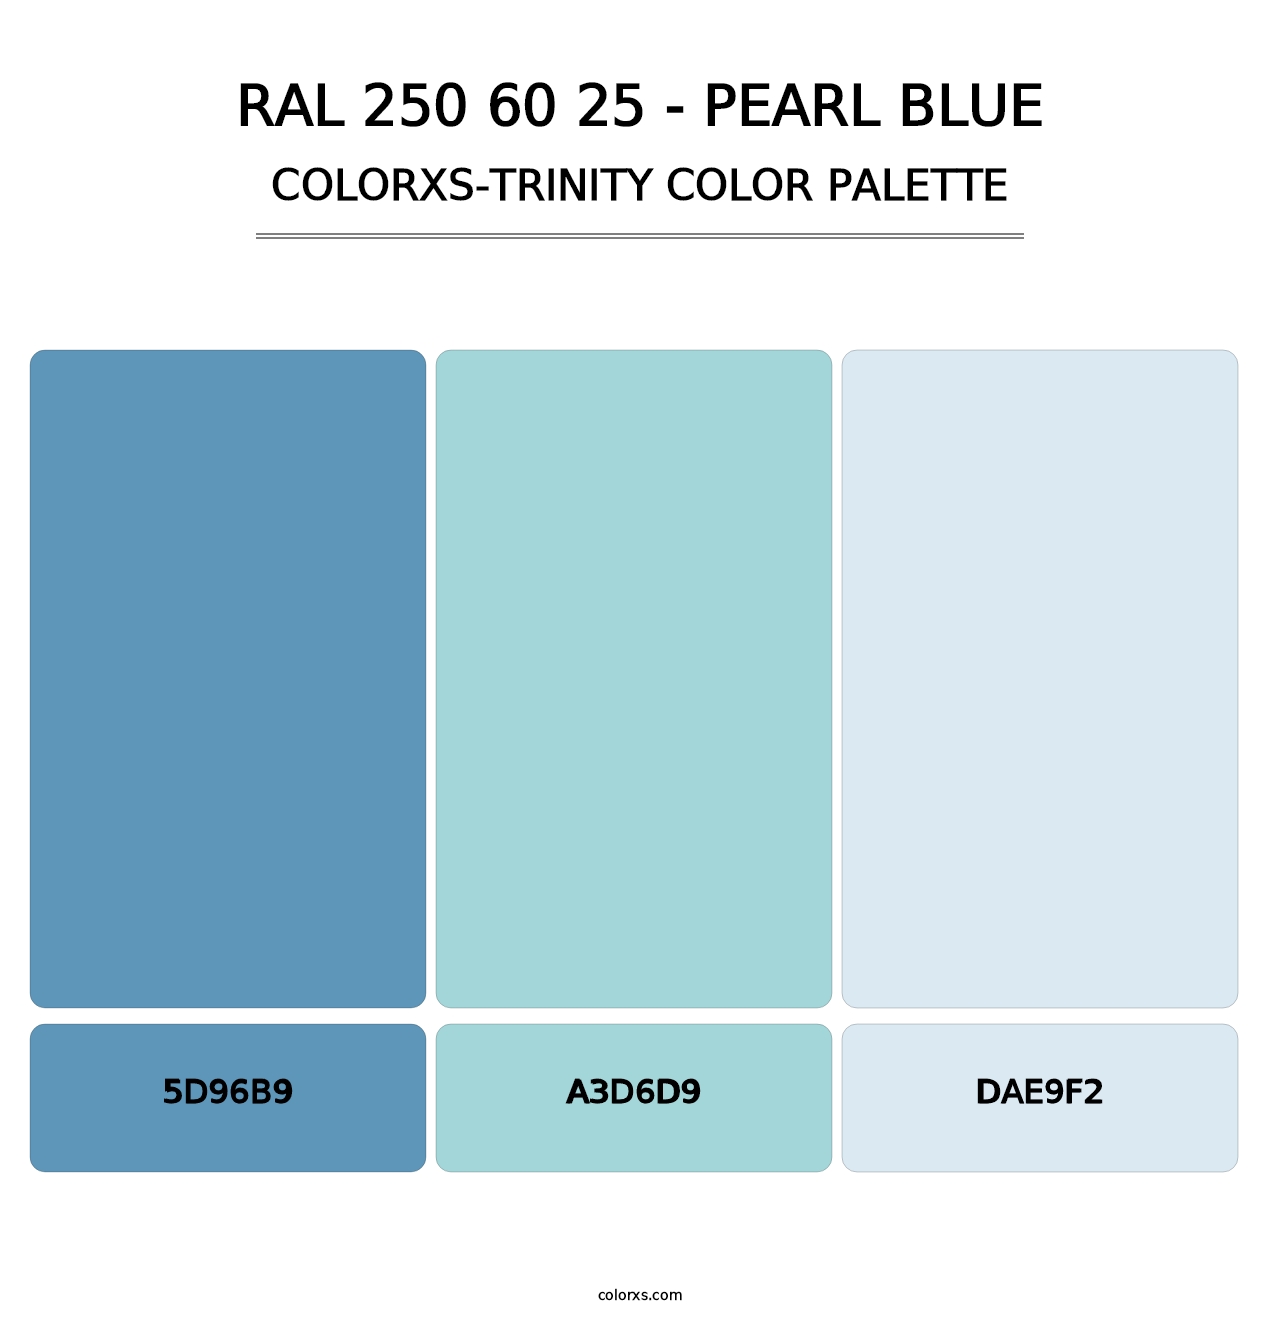 RAL 250 60 25 - Pearl Blue - Colorxs Trinity Palette